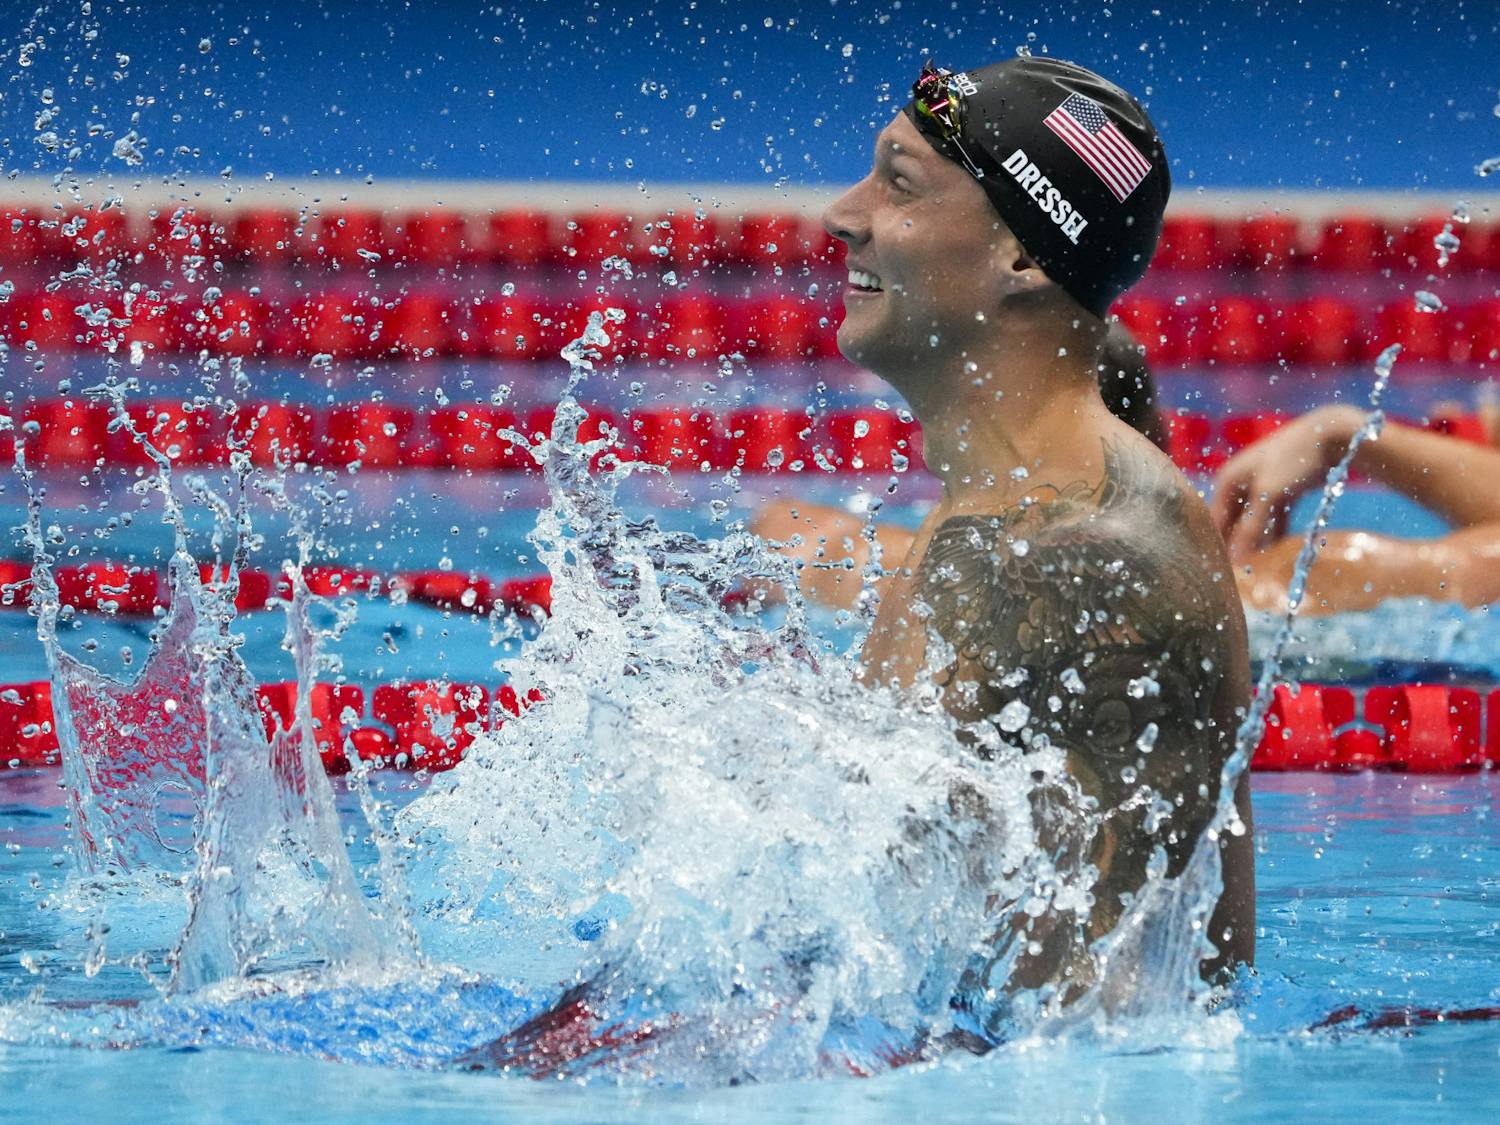 Caeleb Dressel, of the United States, celebrates after winning the men's 100-meter freestyle final at the 2020 Summer Olympics, Thursday, July 29, 2021, in Tokyo, Japan. (AP Photo/Charlie Riedel)